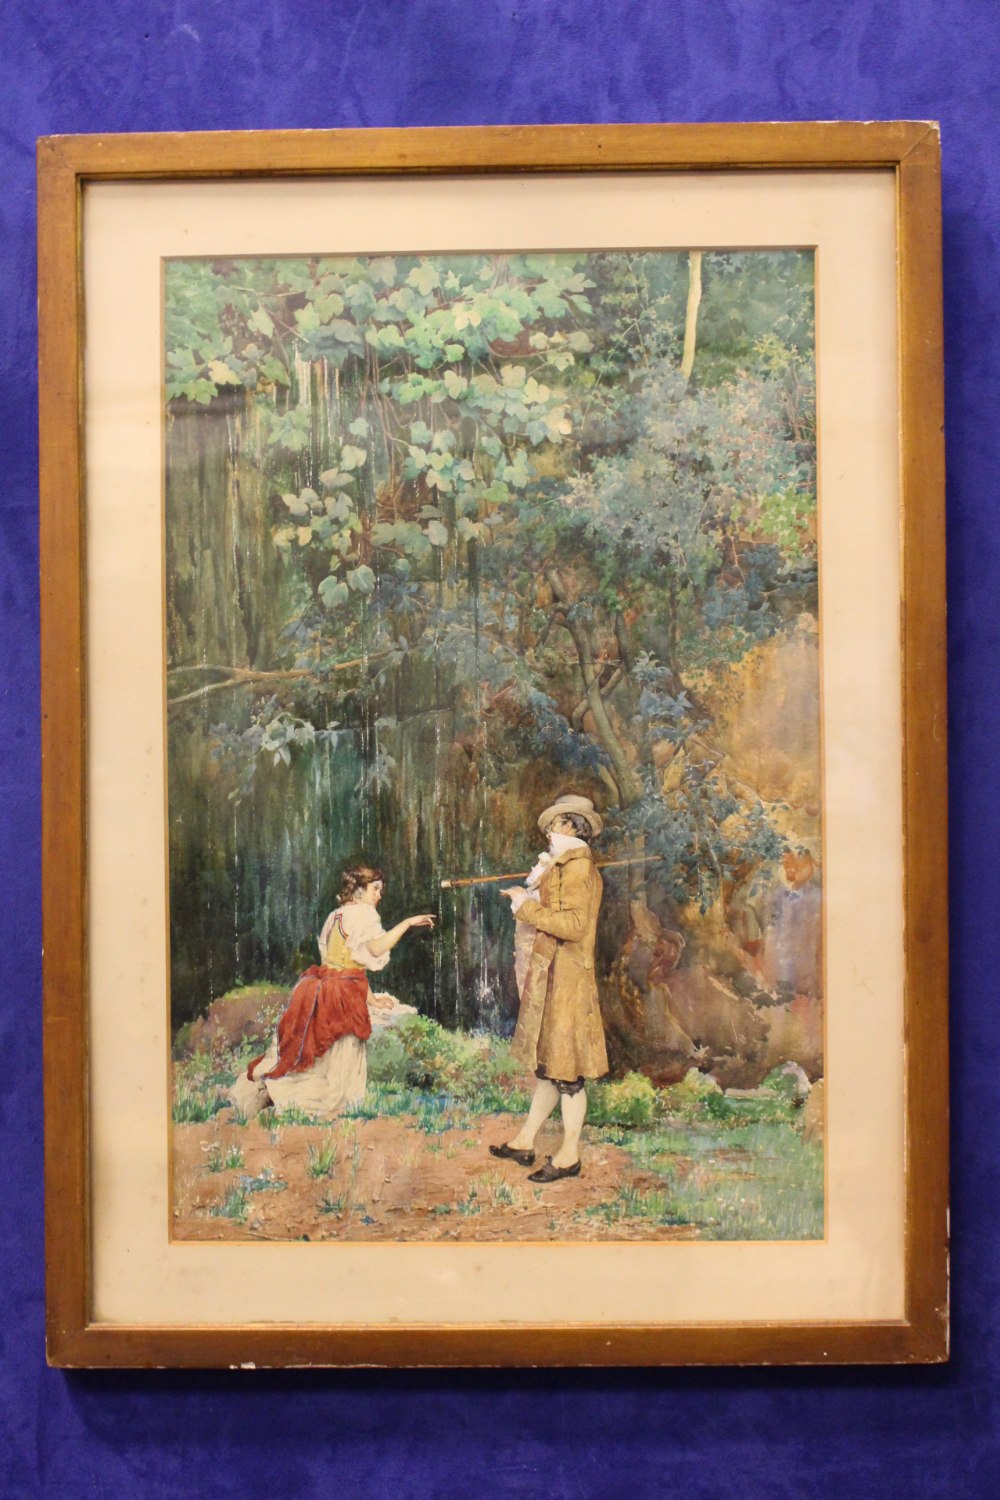 AGUSTO CORELLI, "FORREST GLADE MEETING", watercolour on paper, signed lower right, label verso of "